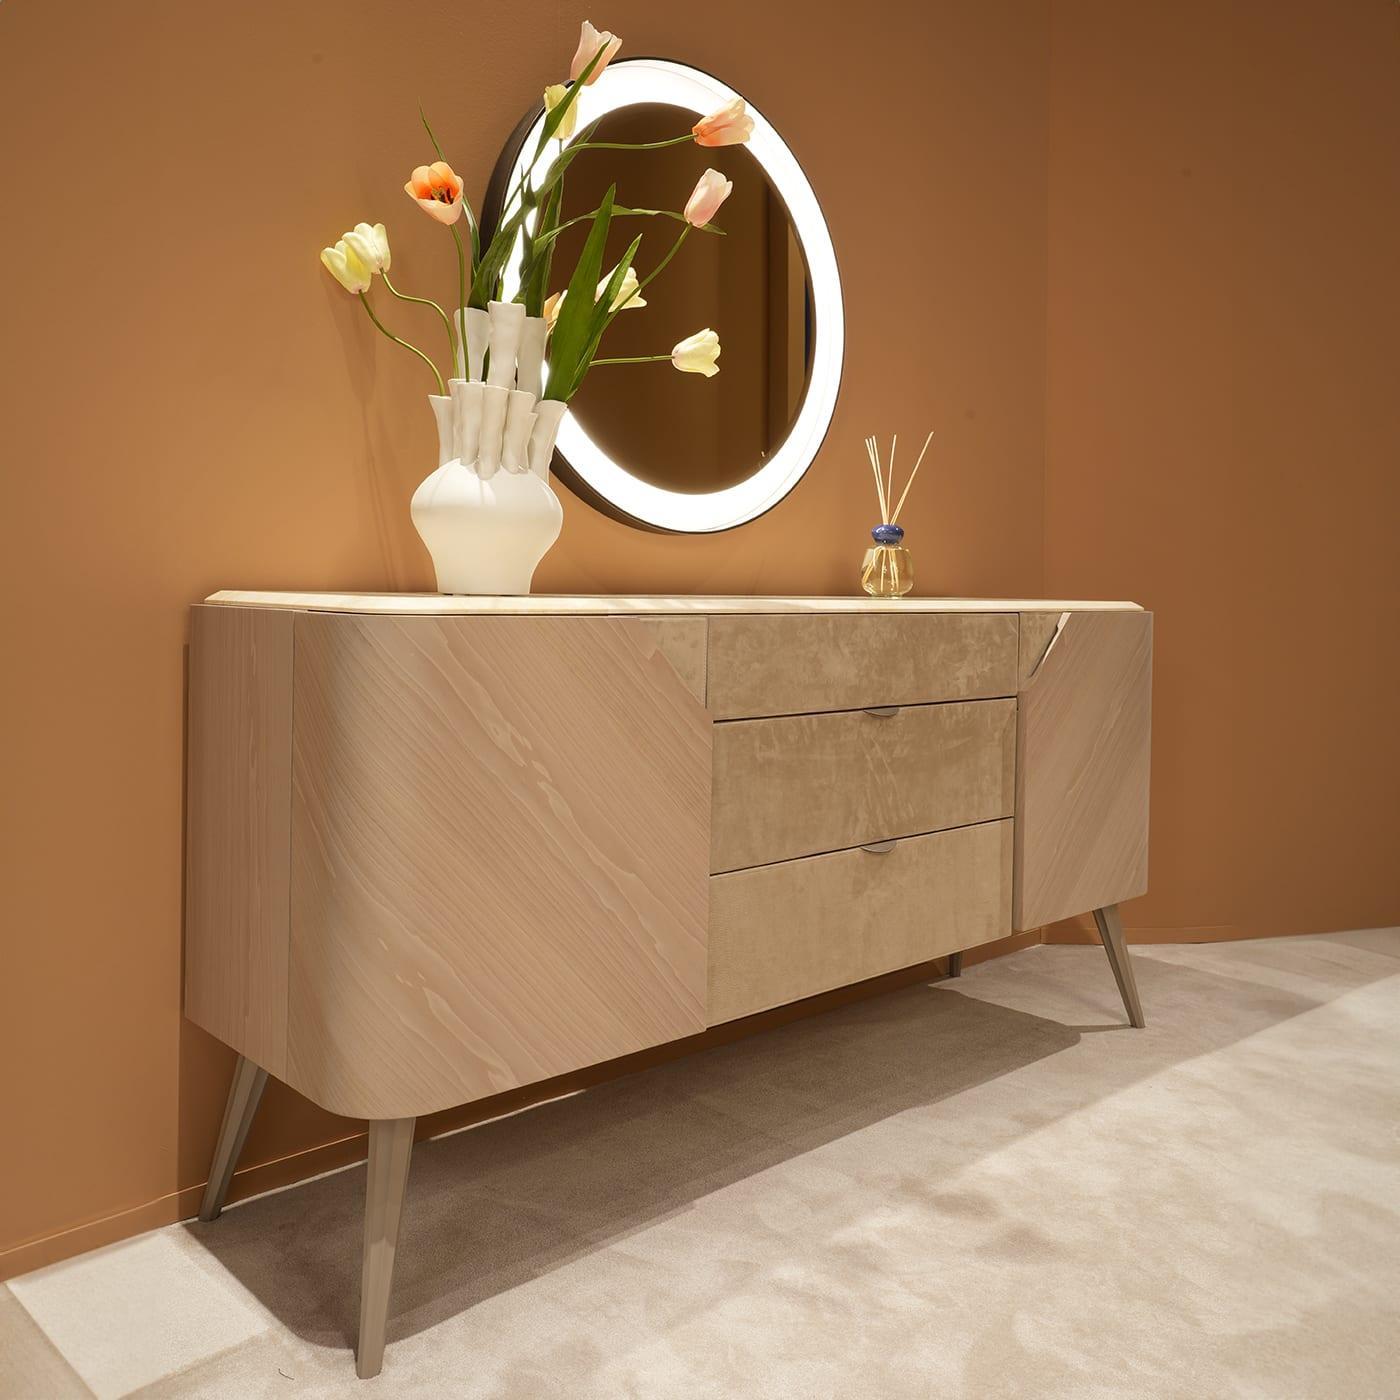 Sleek lines immediately reveal the modern character of this sideboard. Equipped with three central drawers flanked by a couple of shaped doors veneered in Canaletto walnut and lacquered in gray, it allows one to admire natural woodgrain together